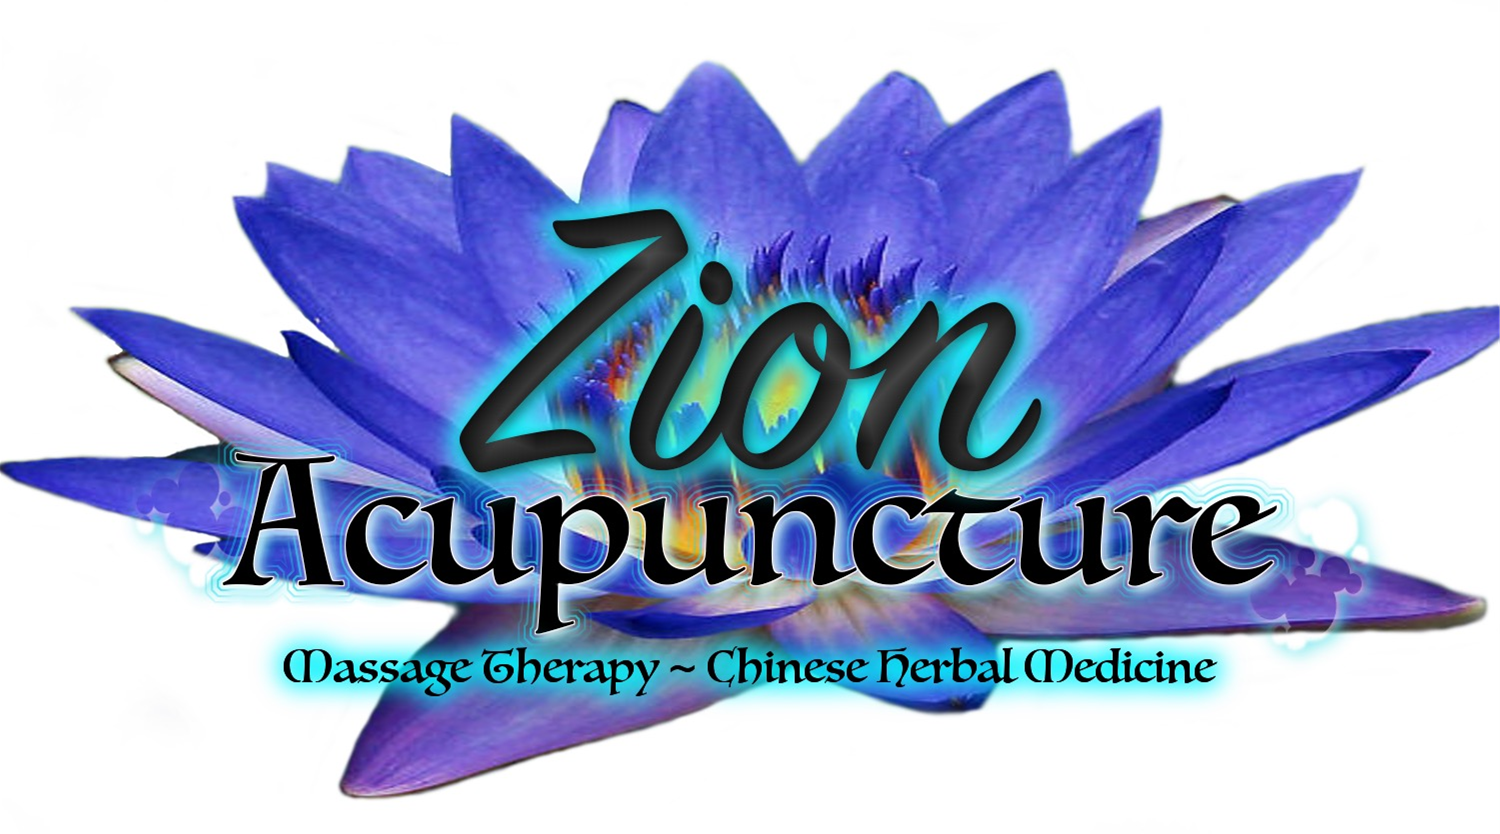 Zion Acupuncture and CBD